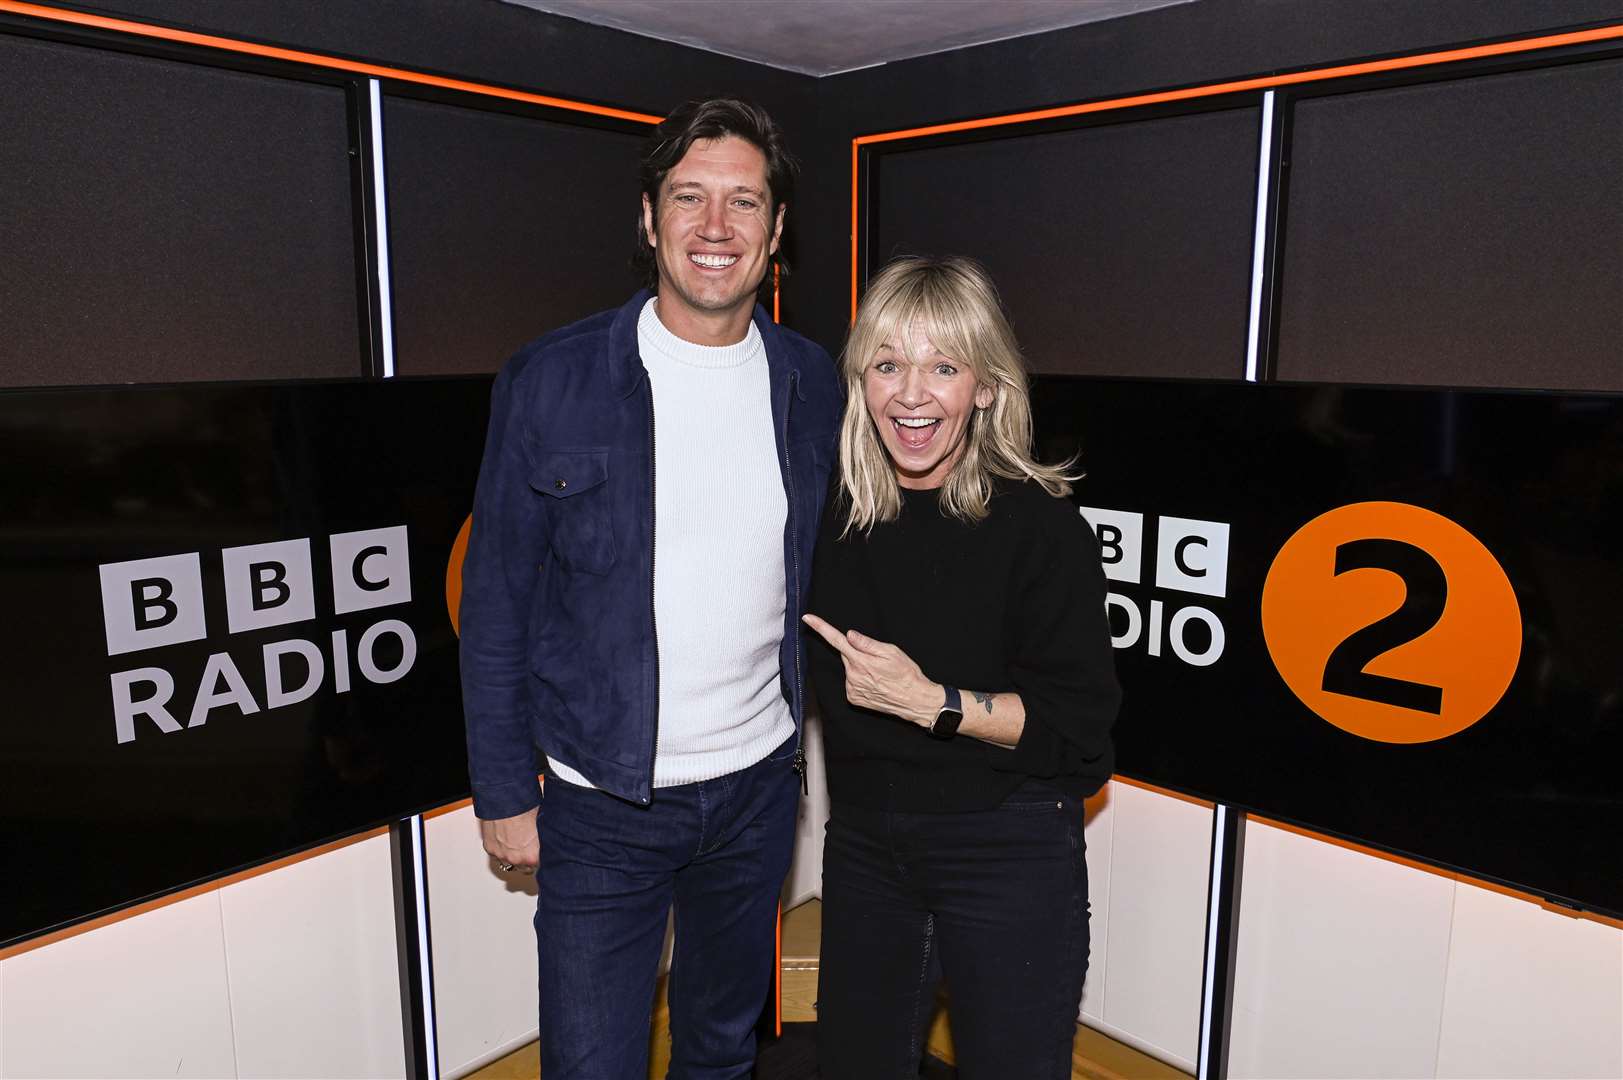 Last week the BBC revealed that TV presenter Vernon Kay will take over Bruce’s Radio 2 slot on a date yet to be announced (BBC)